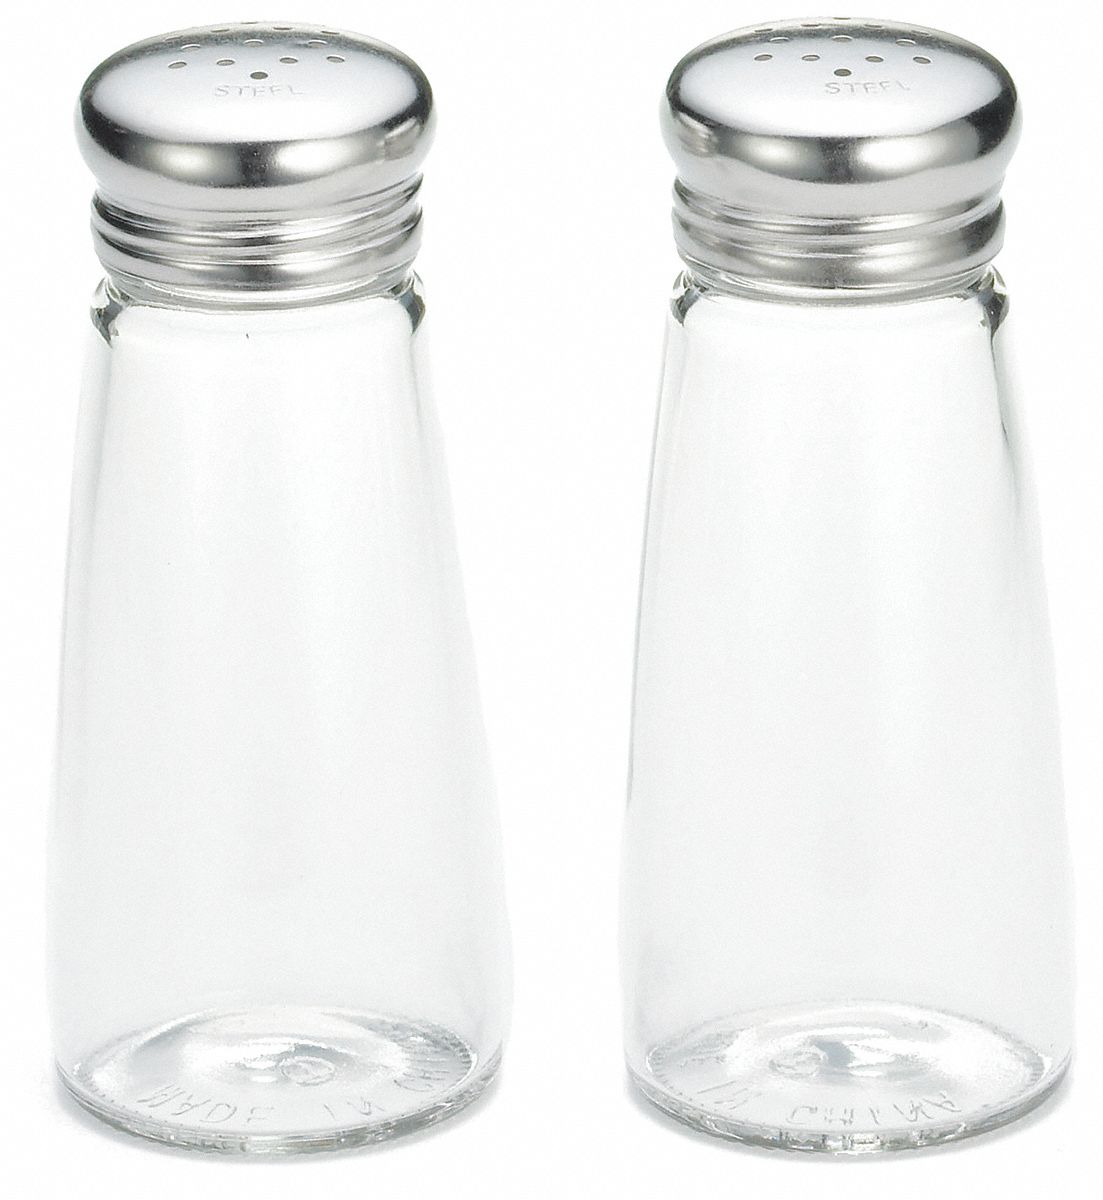 TABLECRAFT PRODUCTS COMPANY Salt and Pepper Shaker,3 Oz,PK72   6DVR5|132S&P   